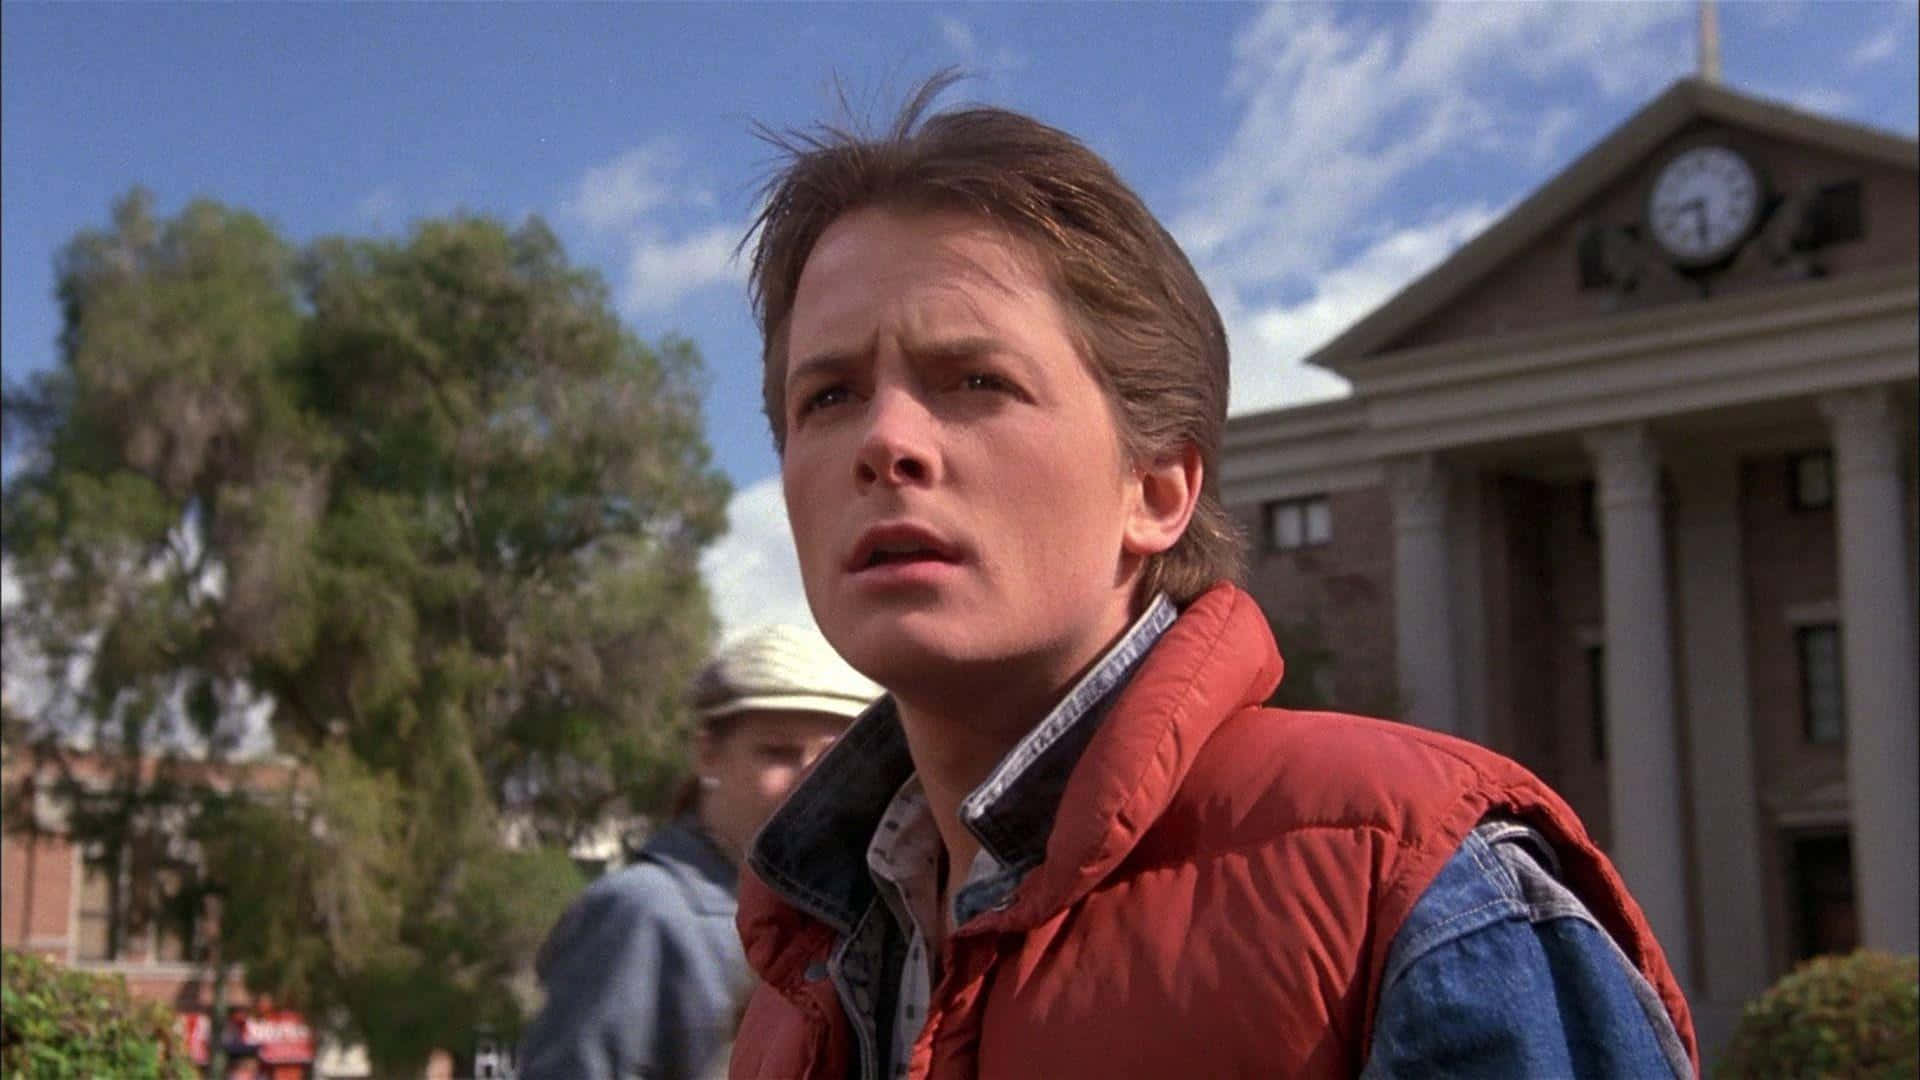 - Michael J. Fox, World-renowned Actor Background